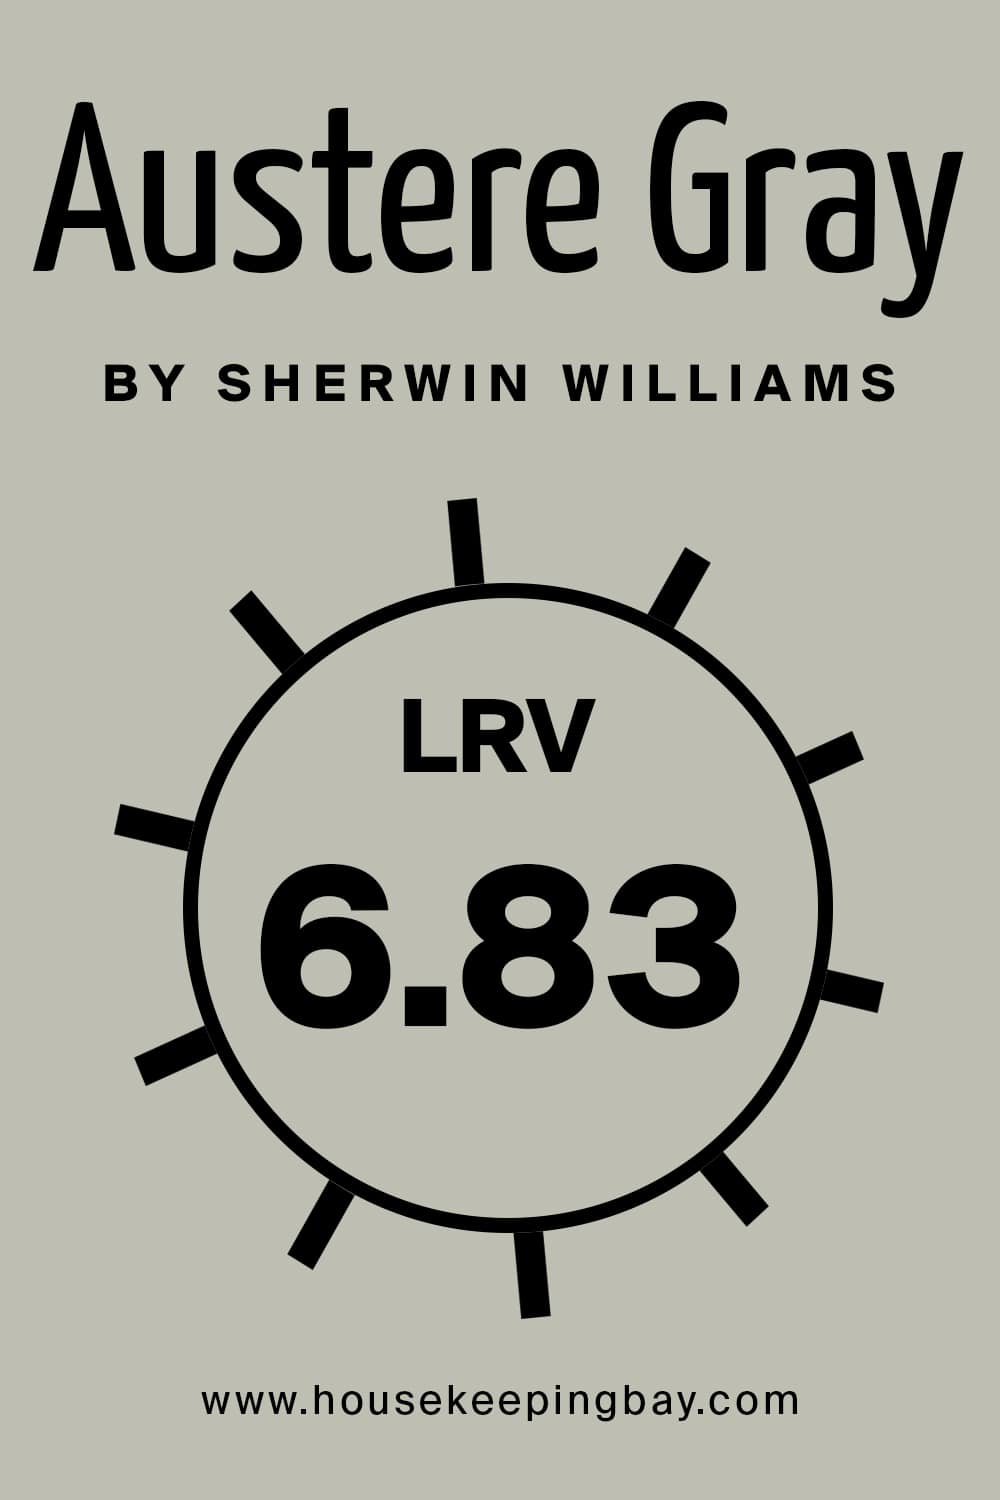 Austere Gray by Sherwin Williams. LRV – 6.83